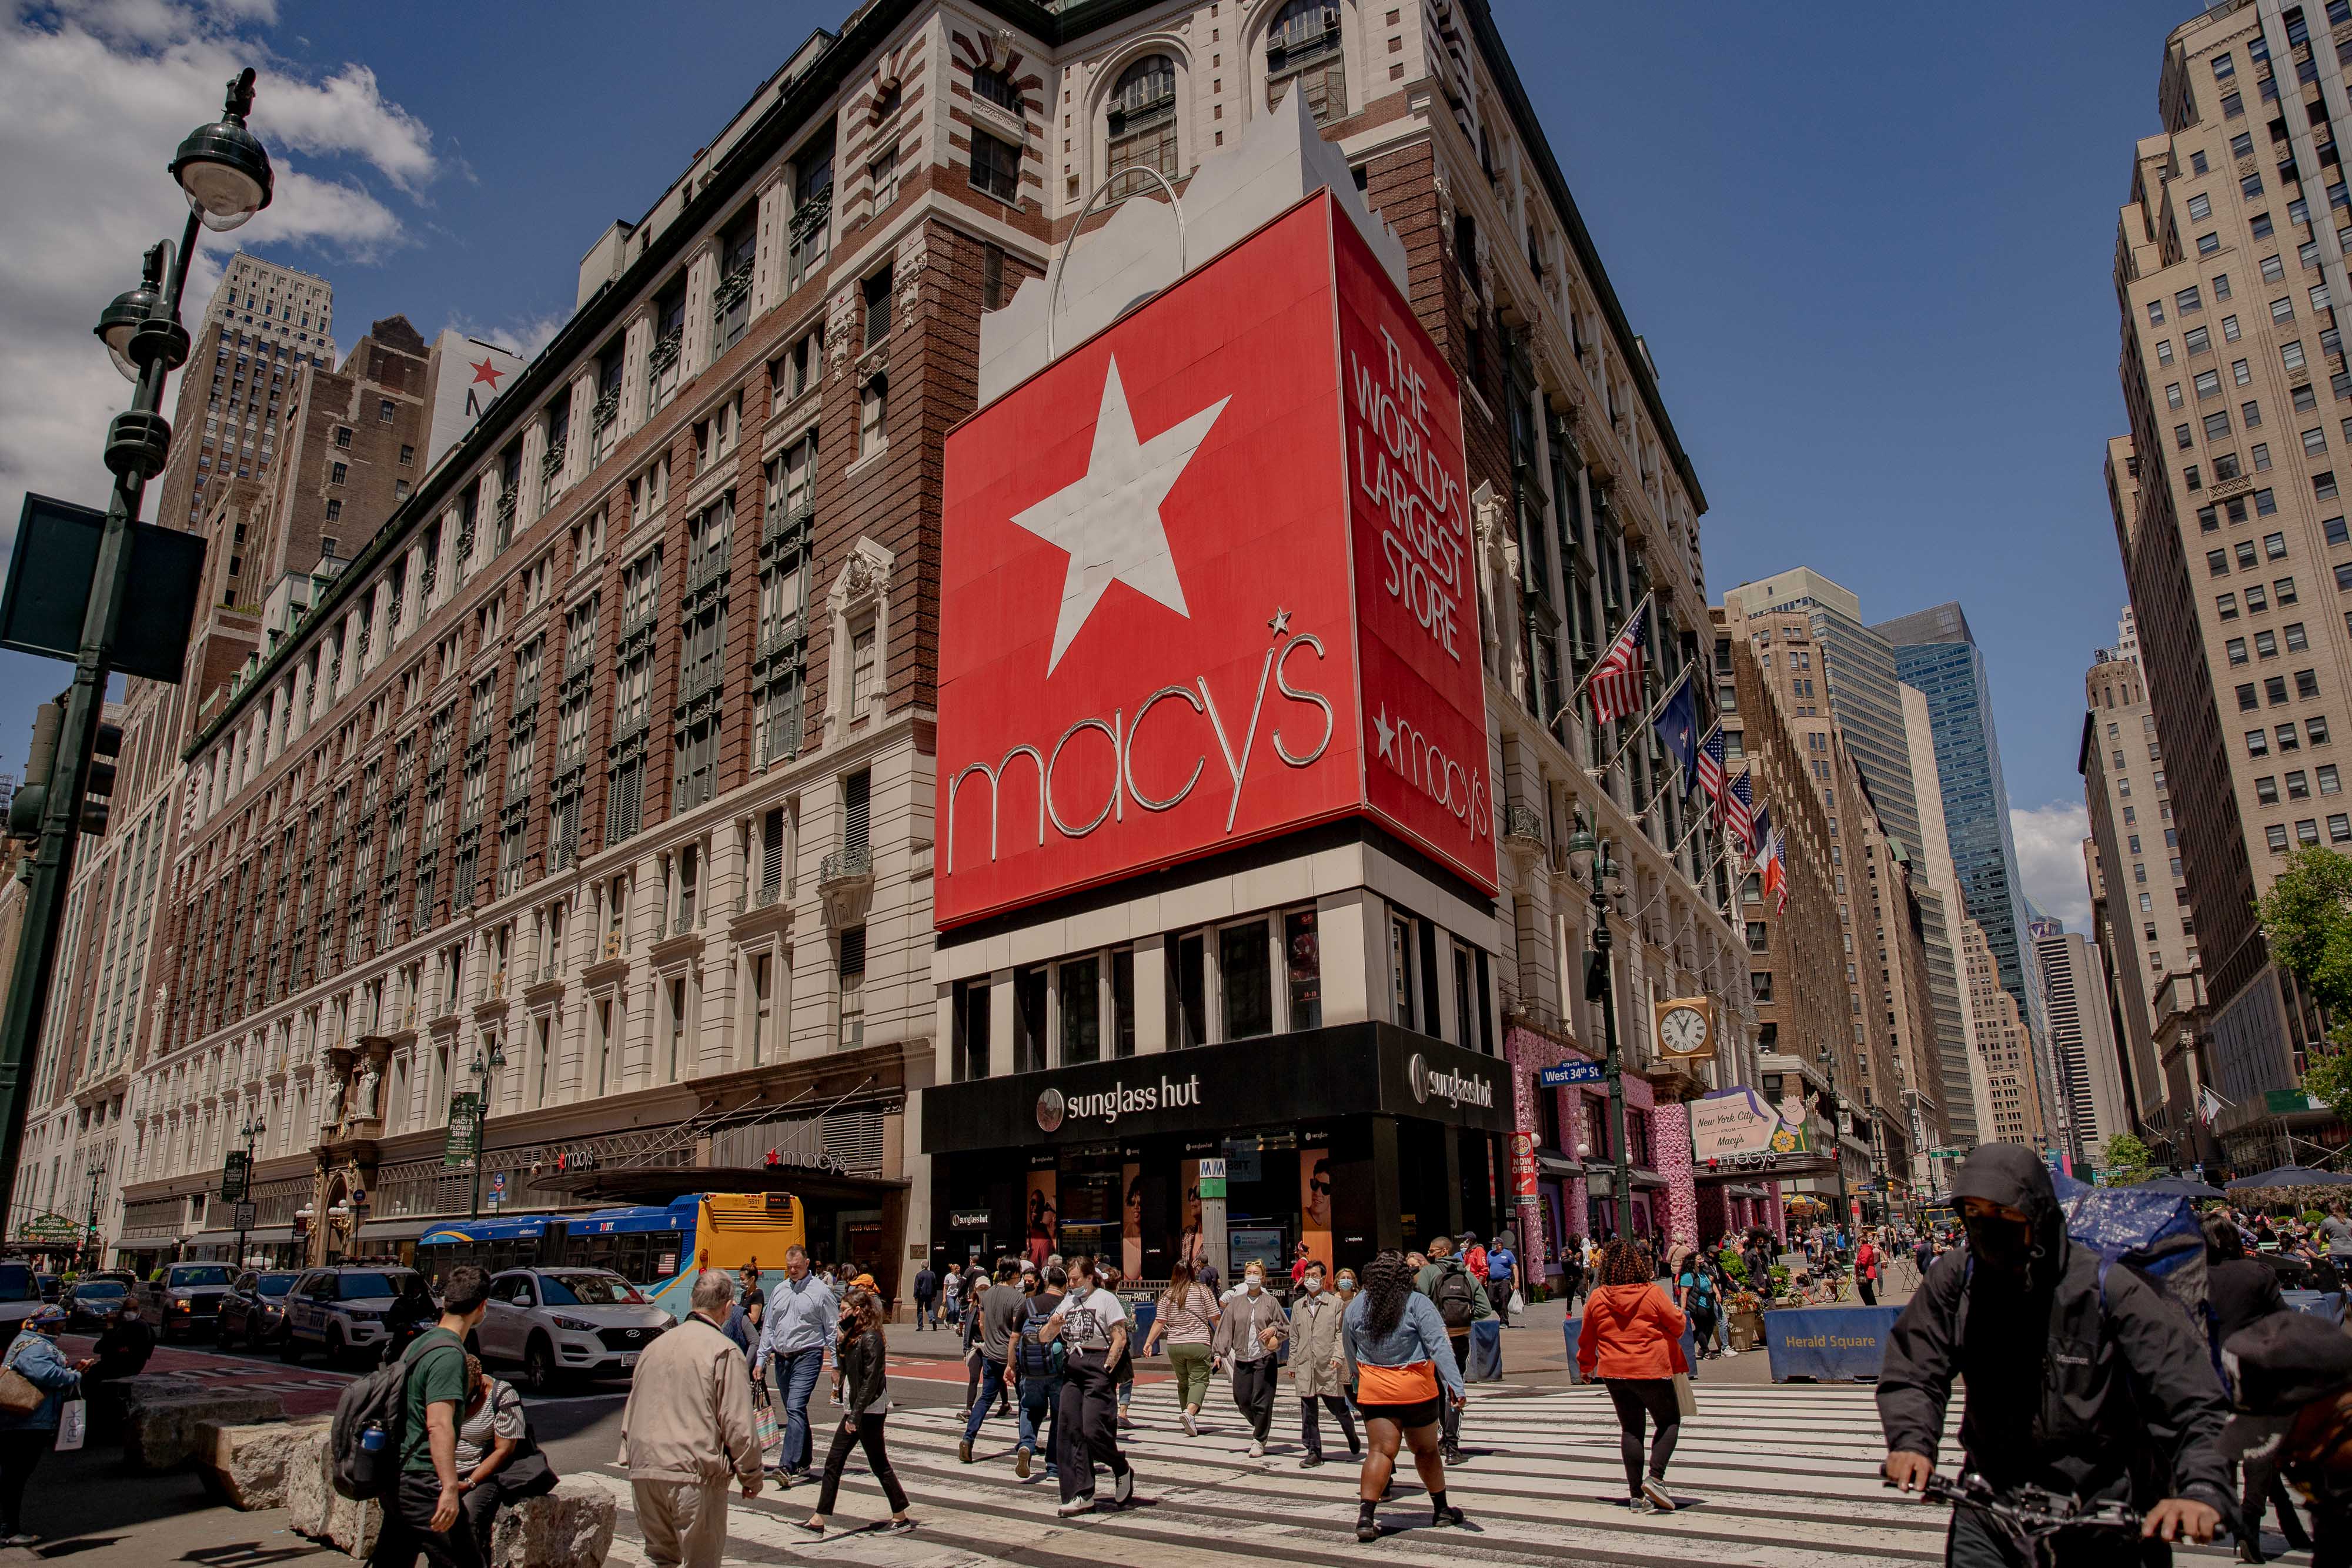 Macy's Landlord Says It Didn't Talk With  About Billboard on NYC  Store - Bloomberg